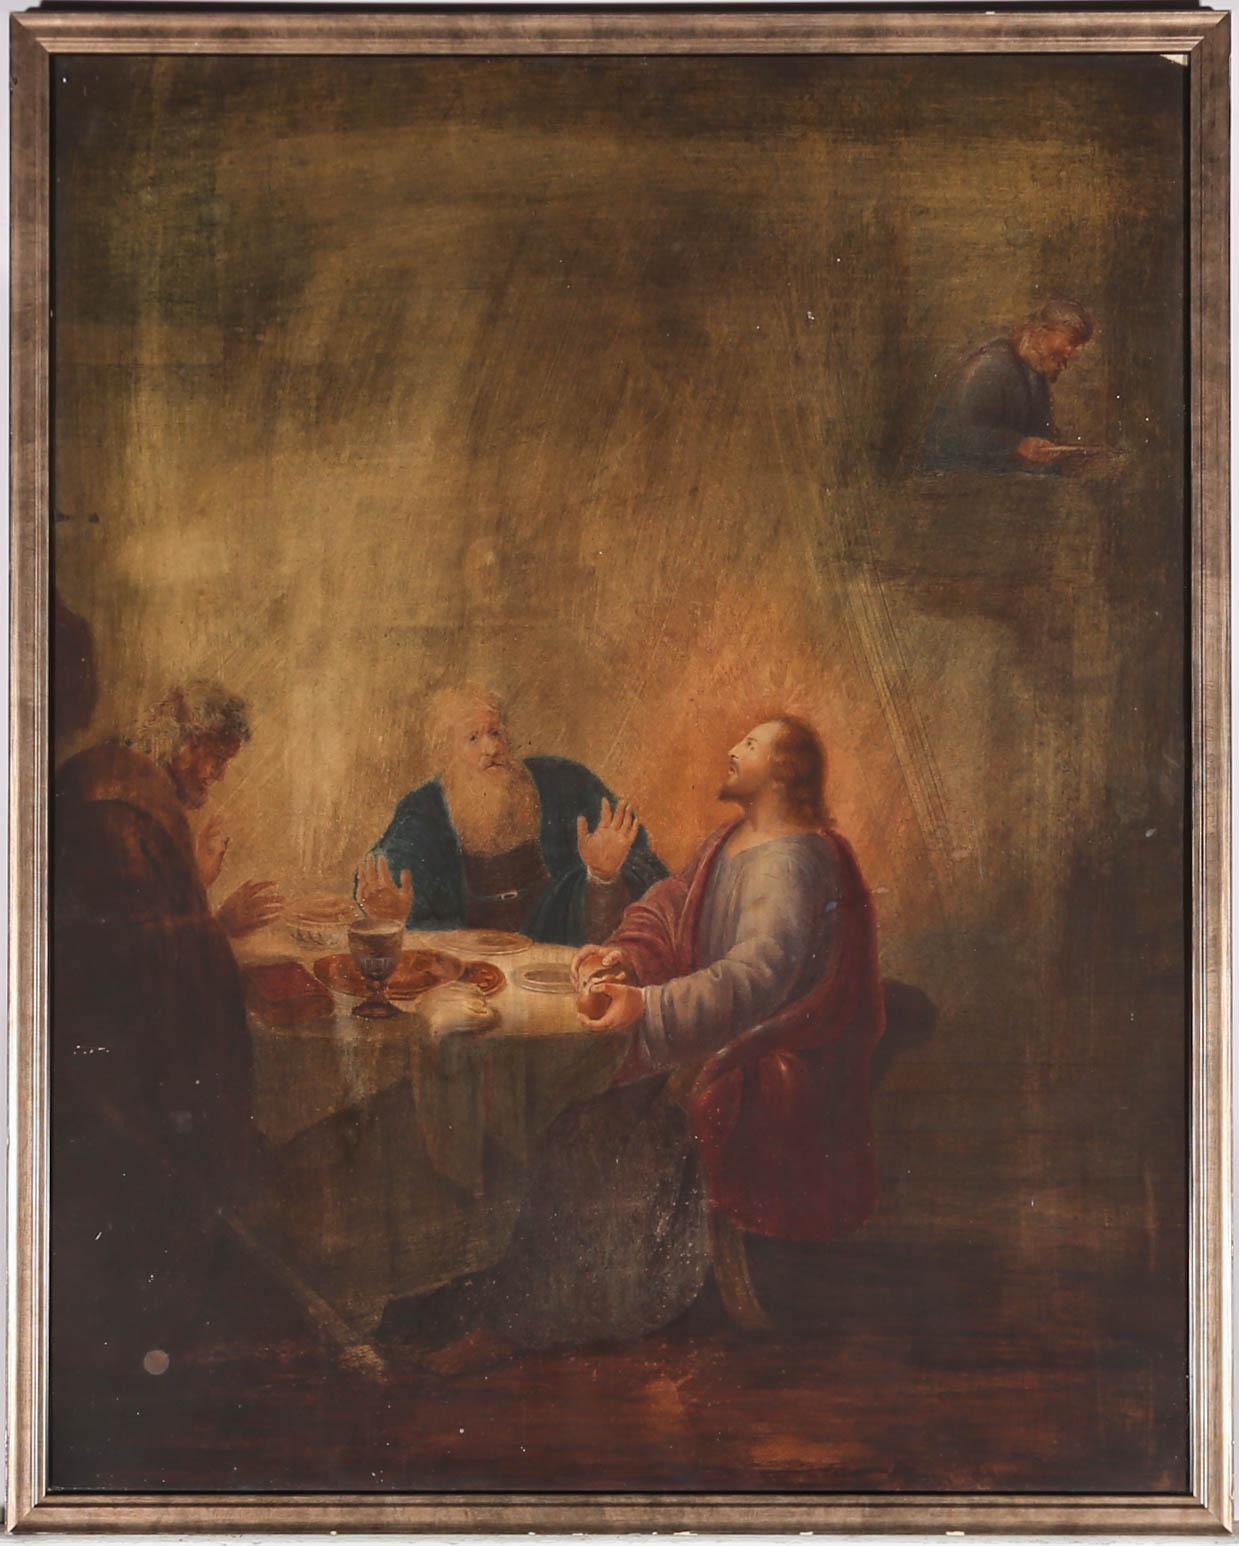 This charming 19th century Dutch Old Master school study is taken from Dirck van Santvoort's 1633 painting of Christ revealing himself to the pilgrims of Emmaus. The original now hangs in the Louvre and is heavily inspired by Rembrandt's painting on